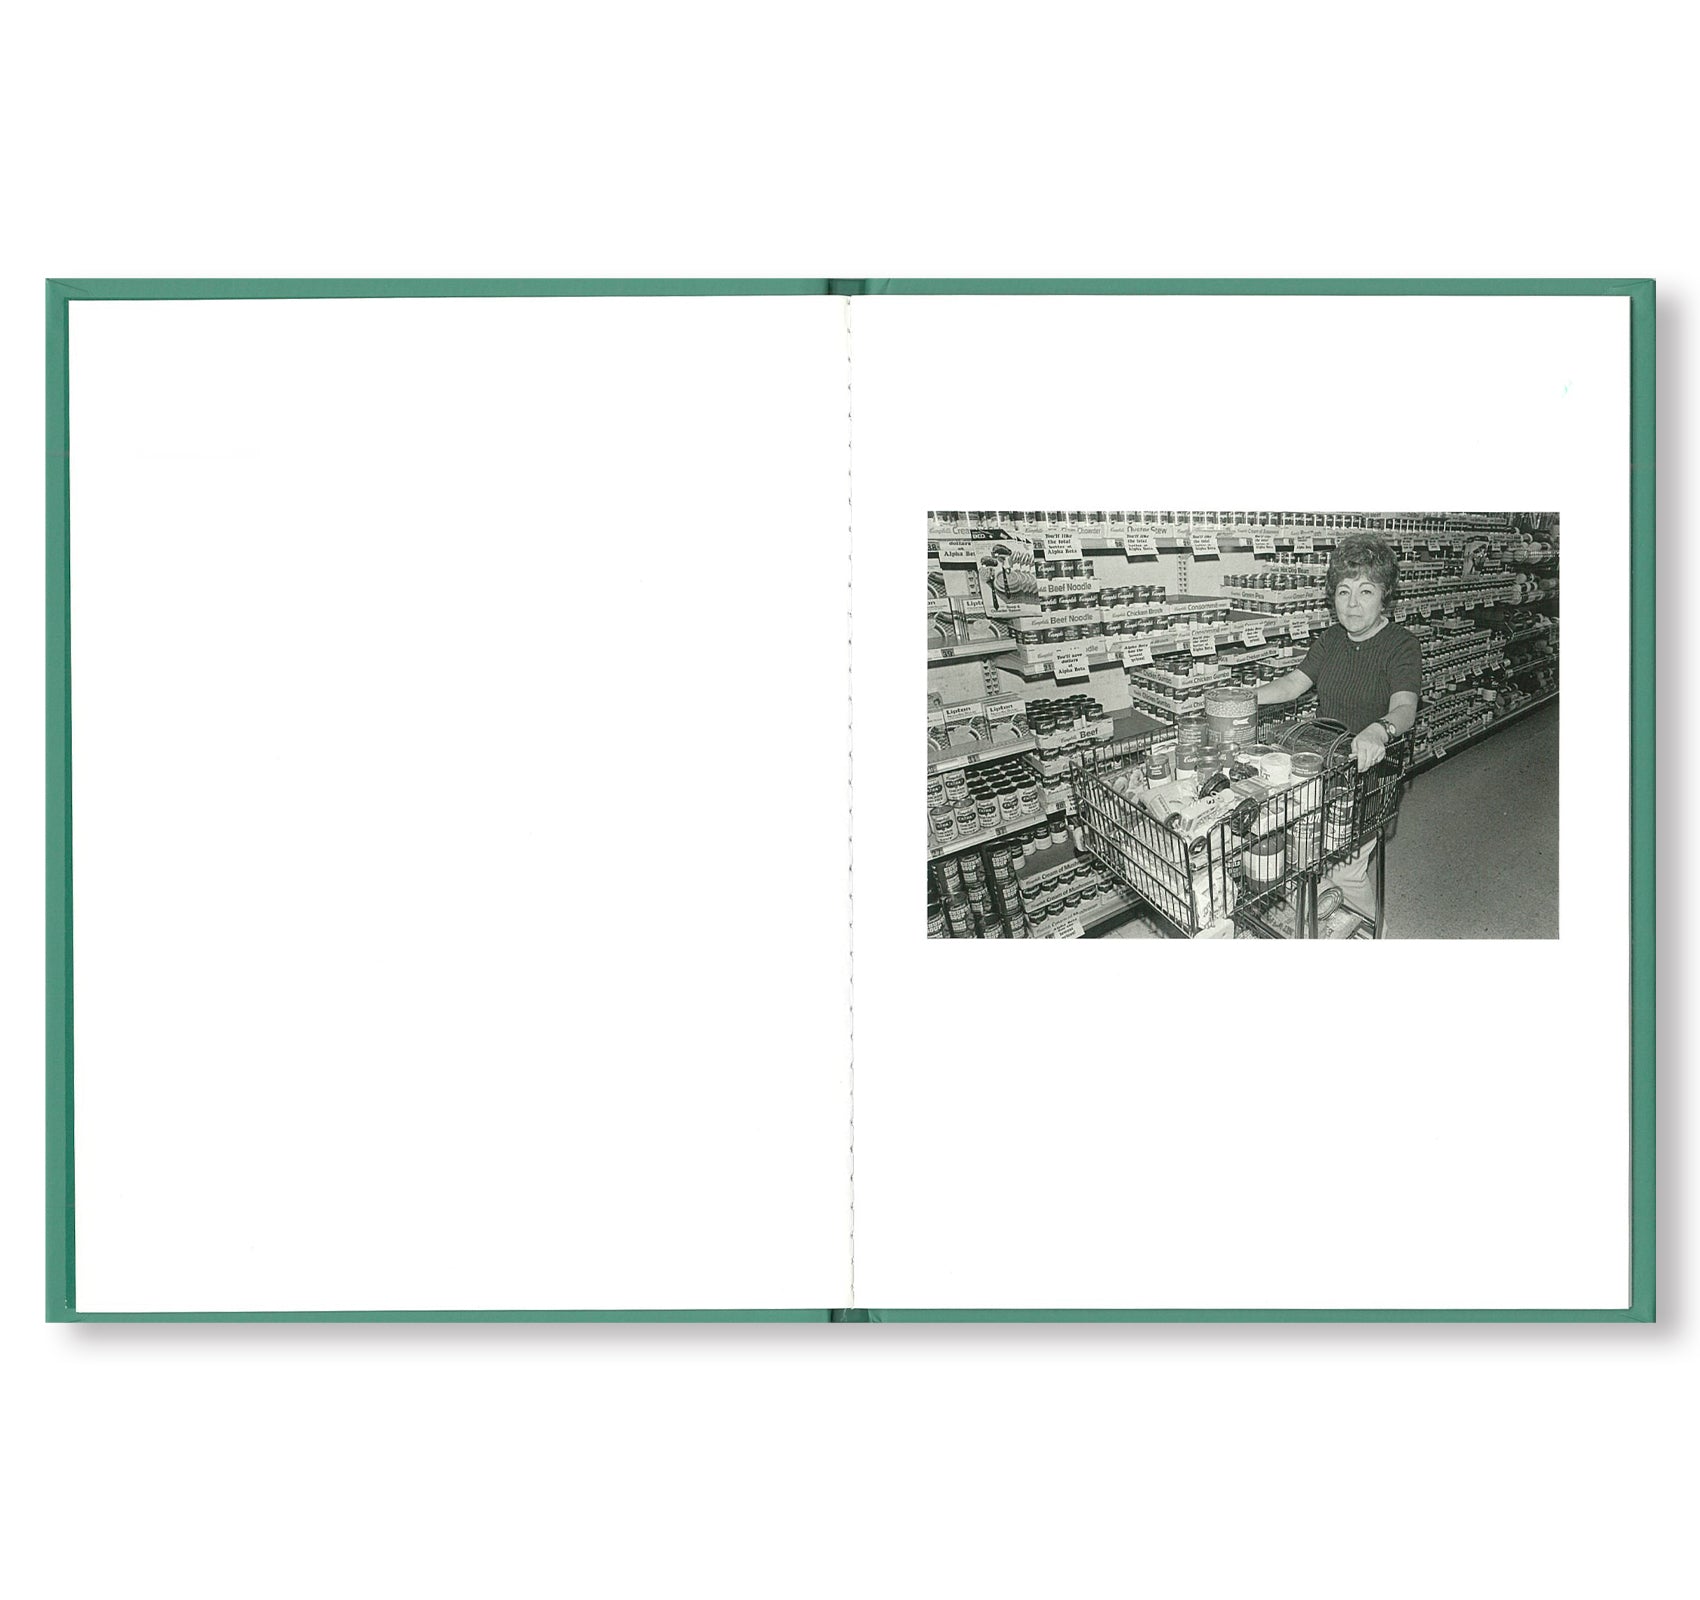 ONE PICTURE BOOK #81: SUPERMARKET by John Divola